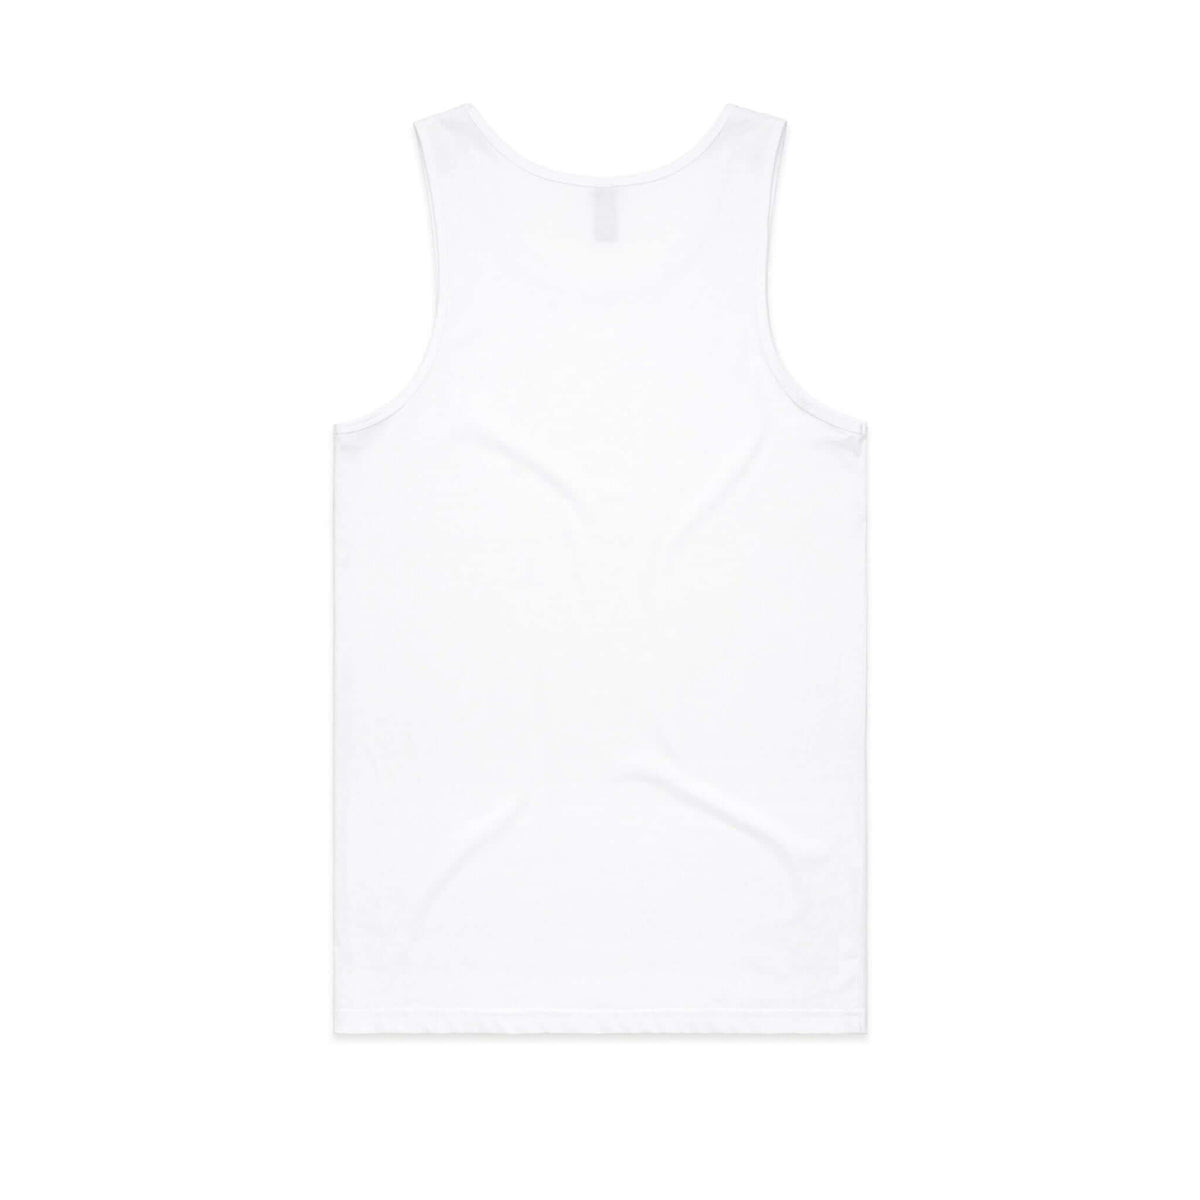 White tank top with bright surfboard design